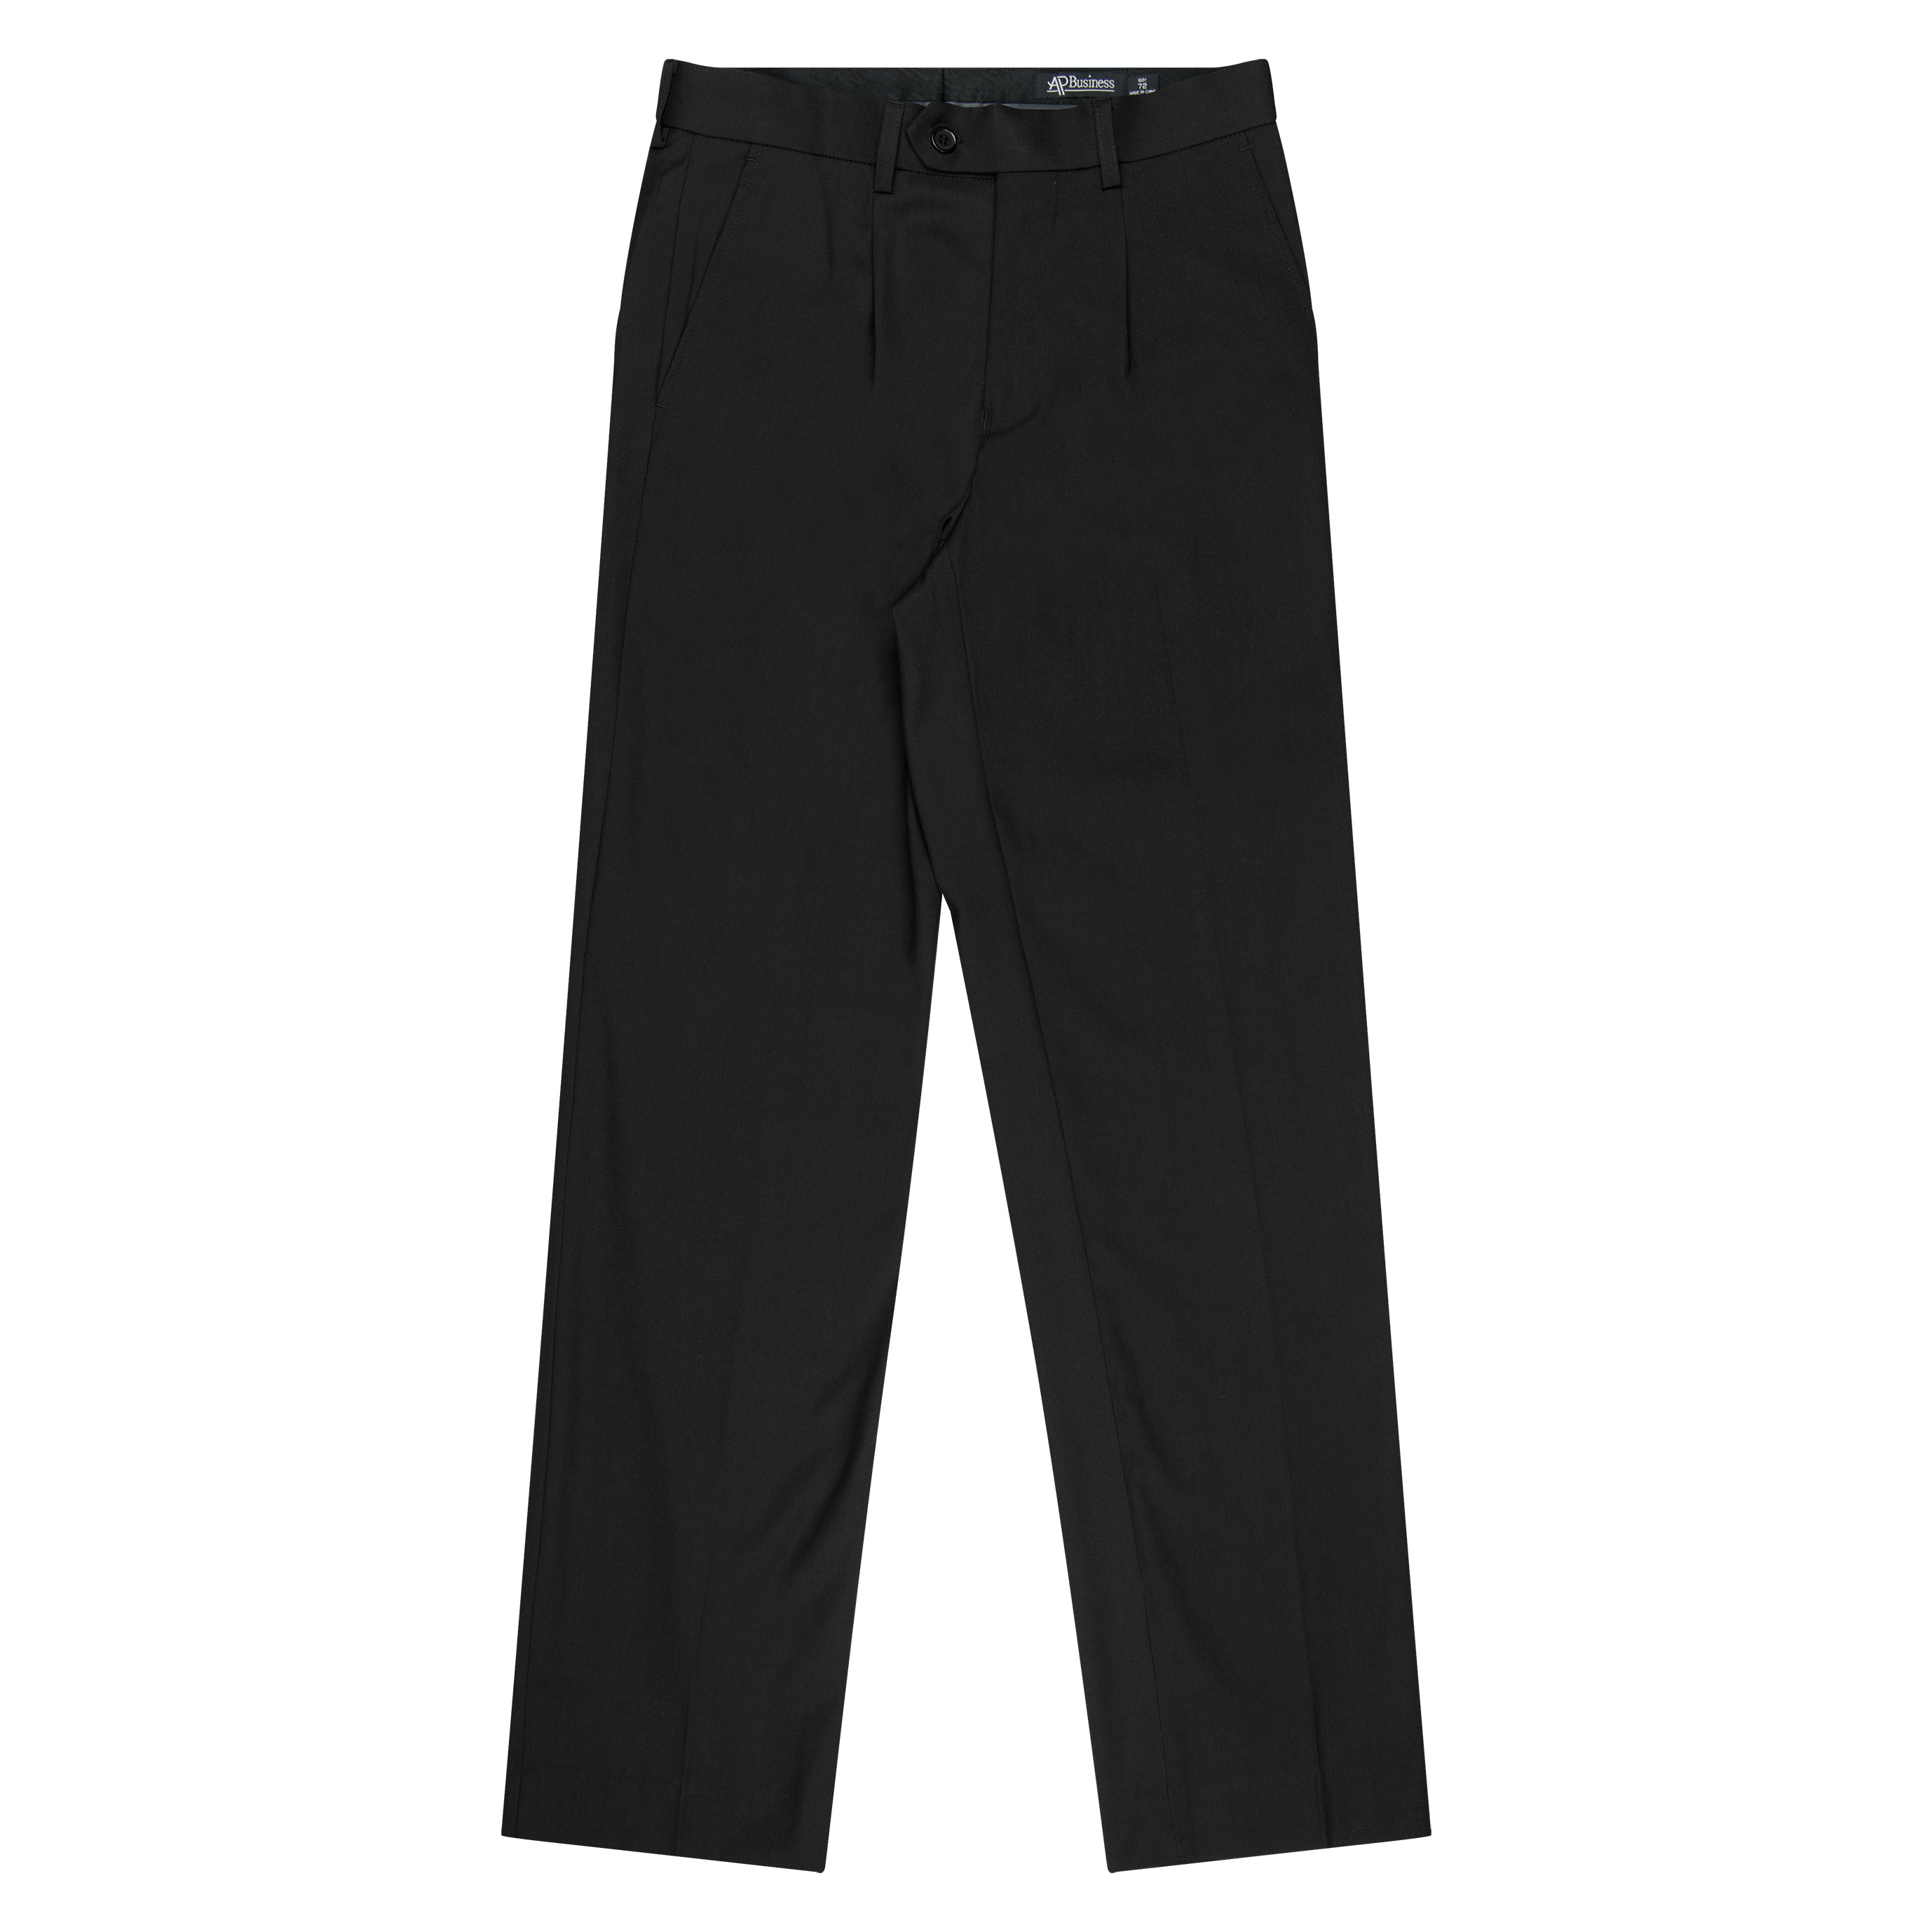 PLEATED PANT MENS PANTS RUNOUT - 1801 - MONTYS PROMO PRODUCTS ...